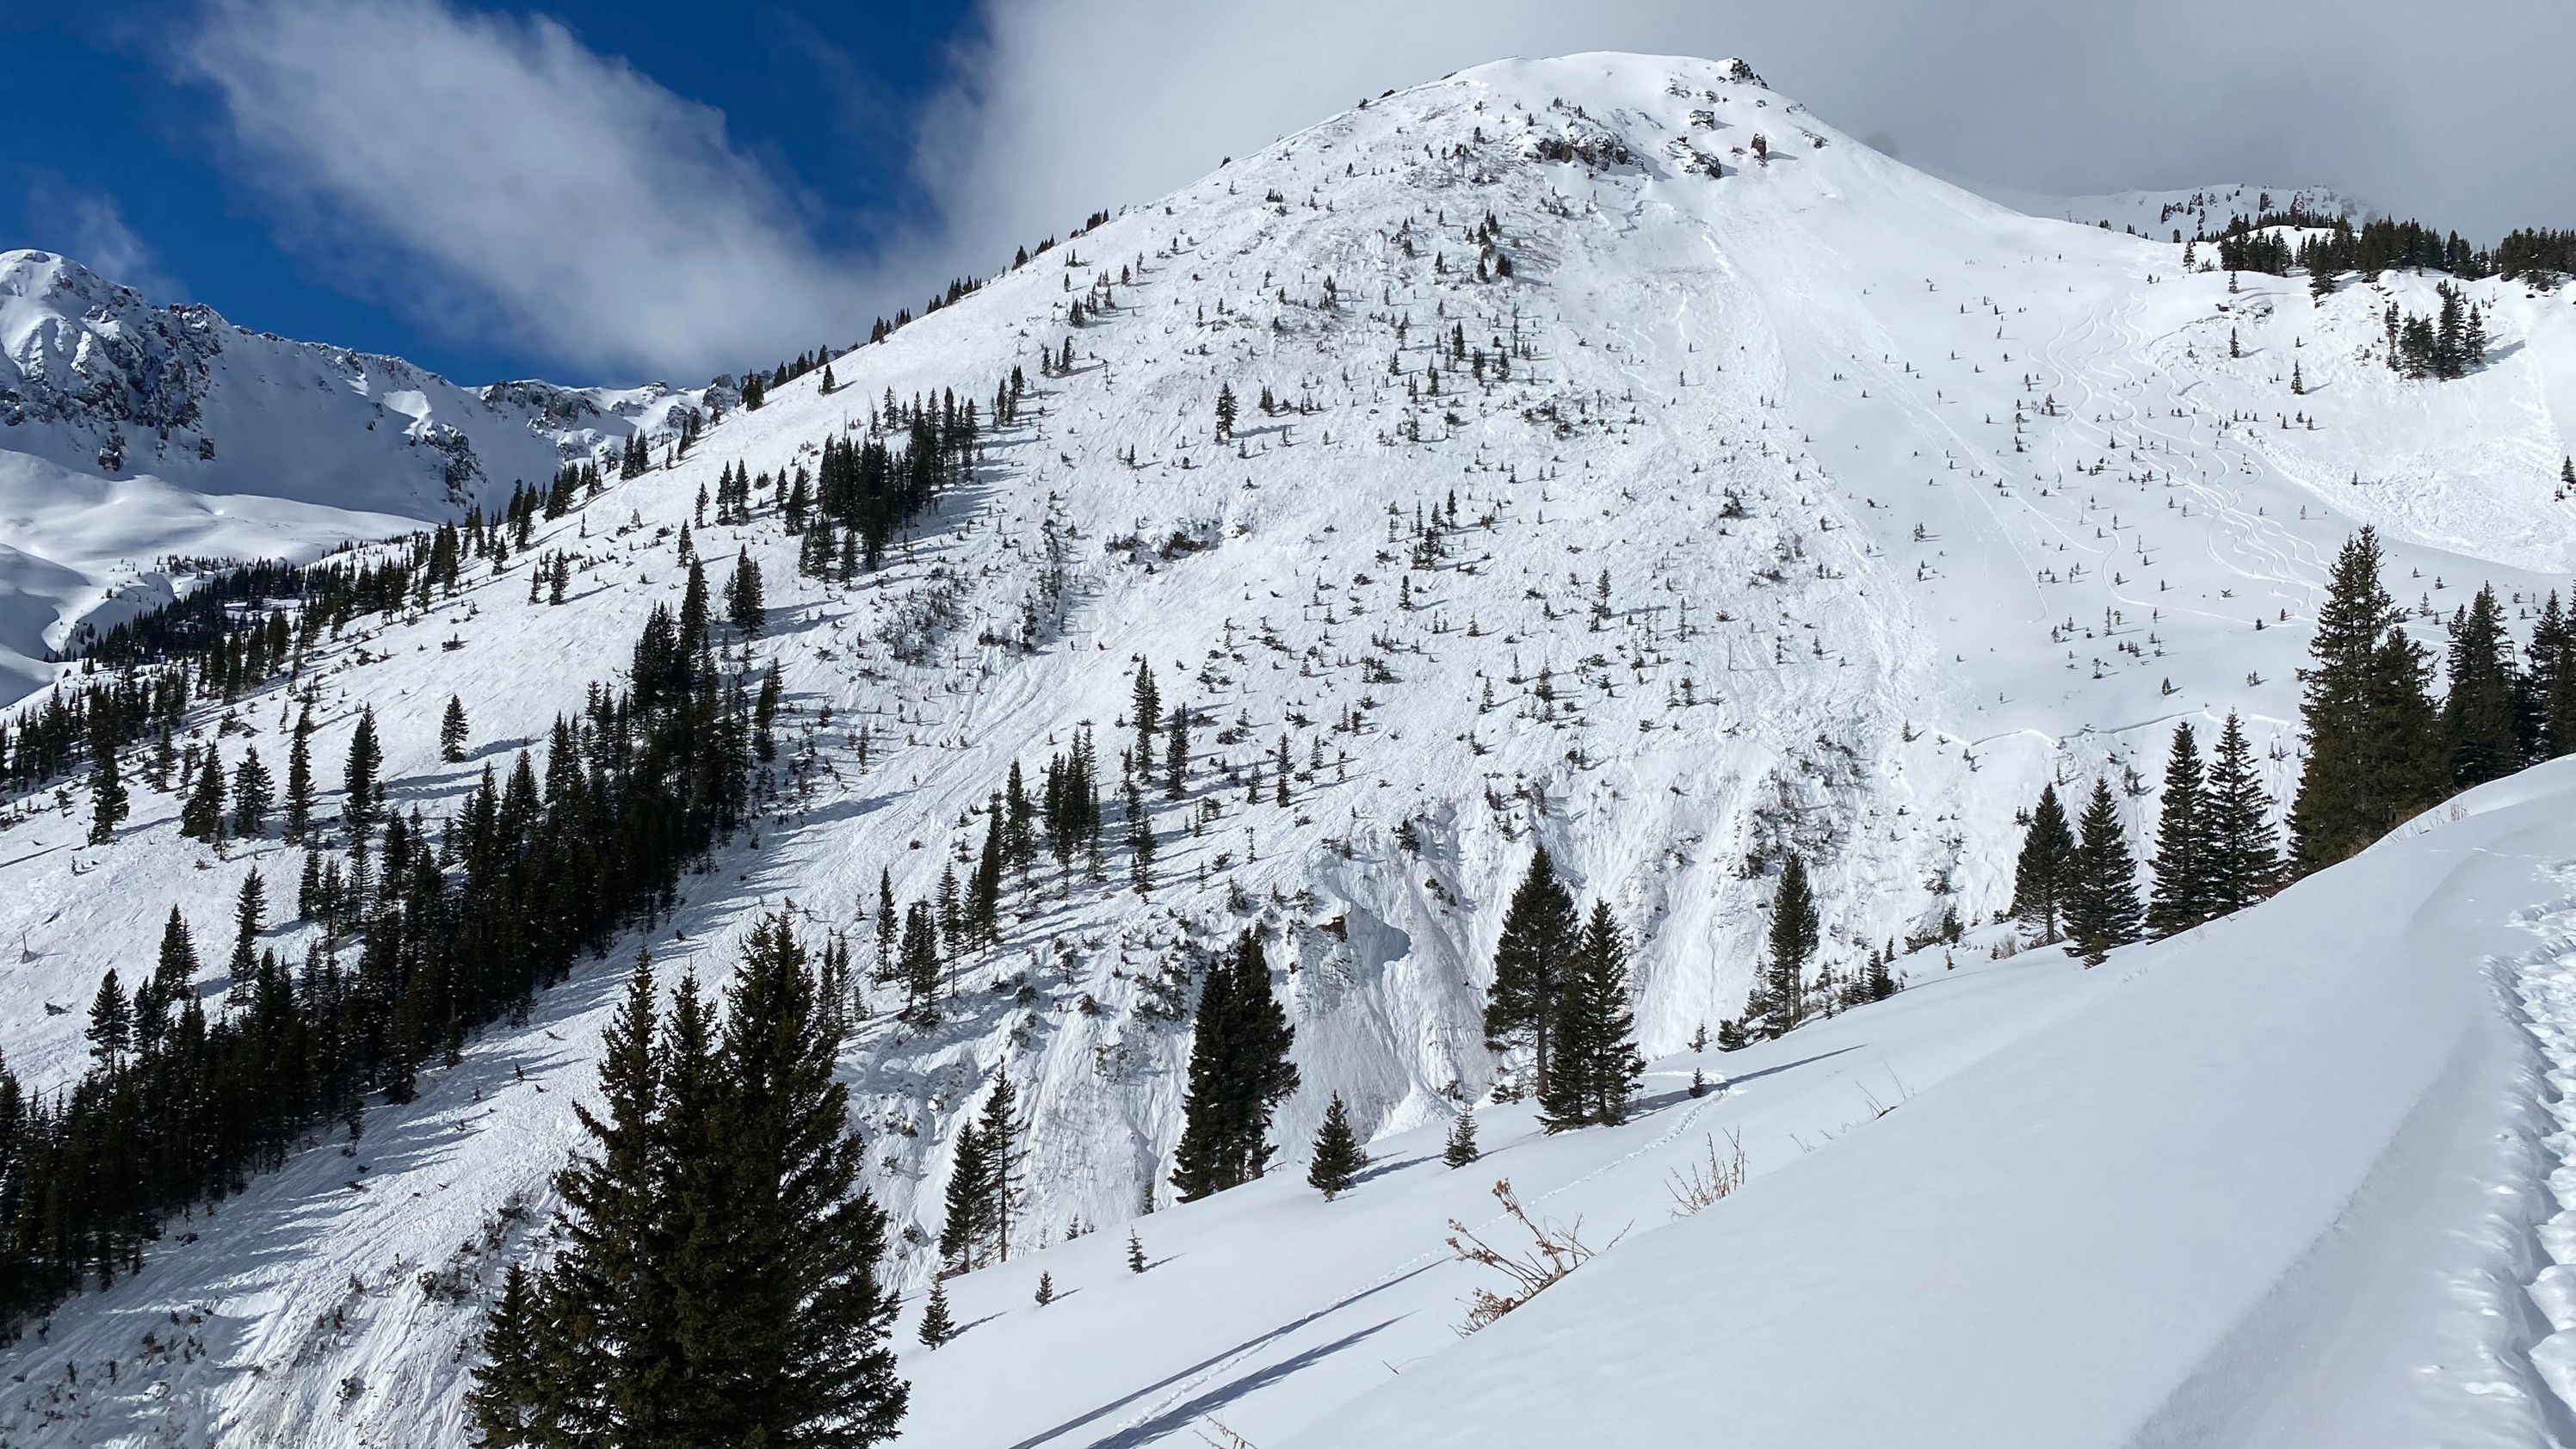 The group of skiers' tracks are still visible to the right of the avalanche, according to the Colorado Avalanche Information Center.